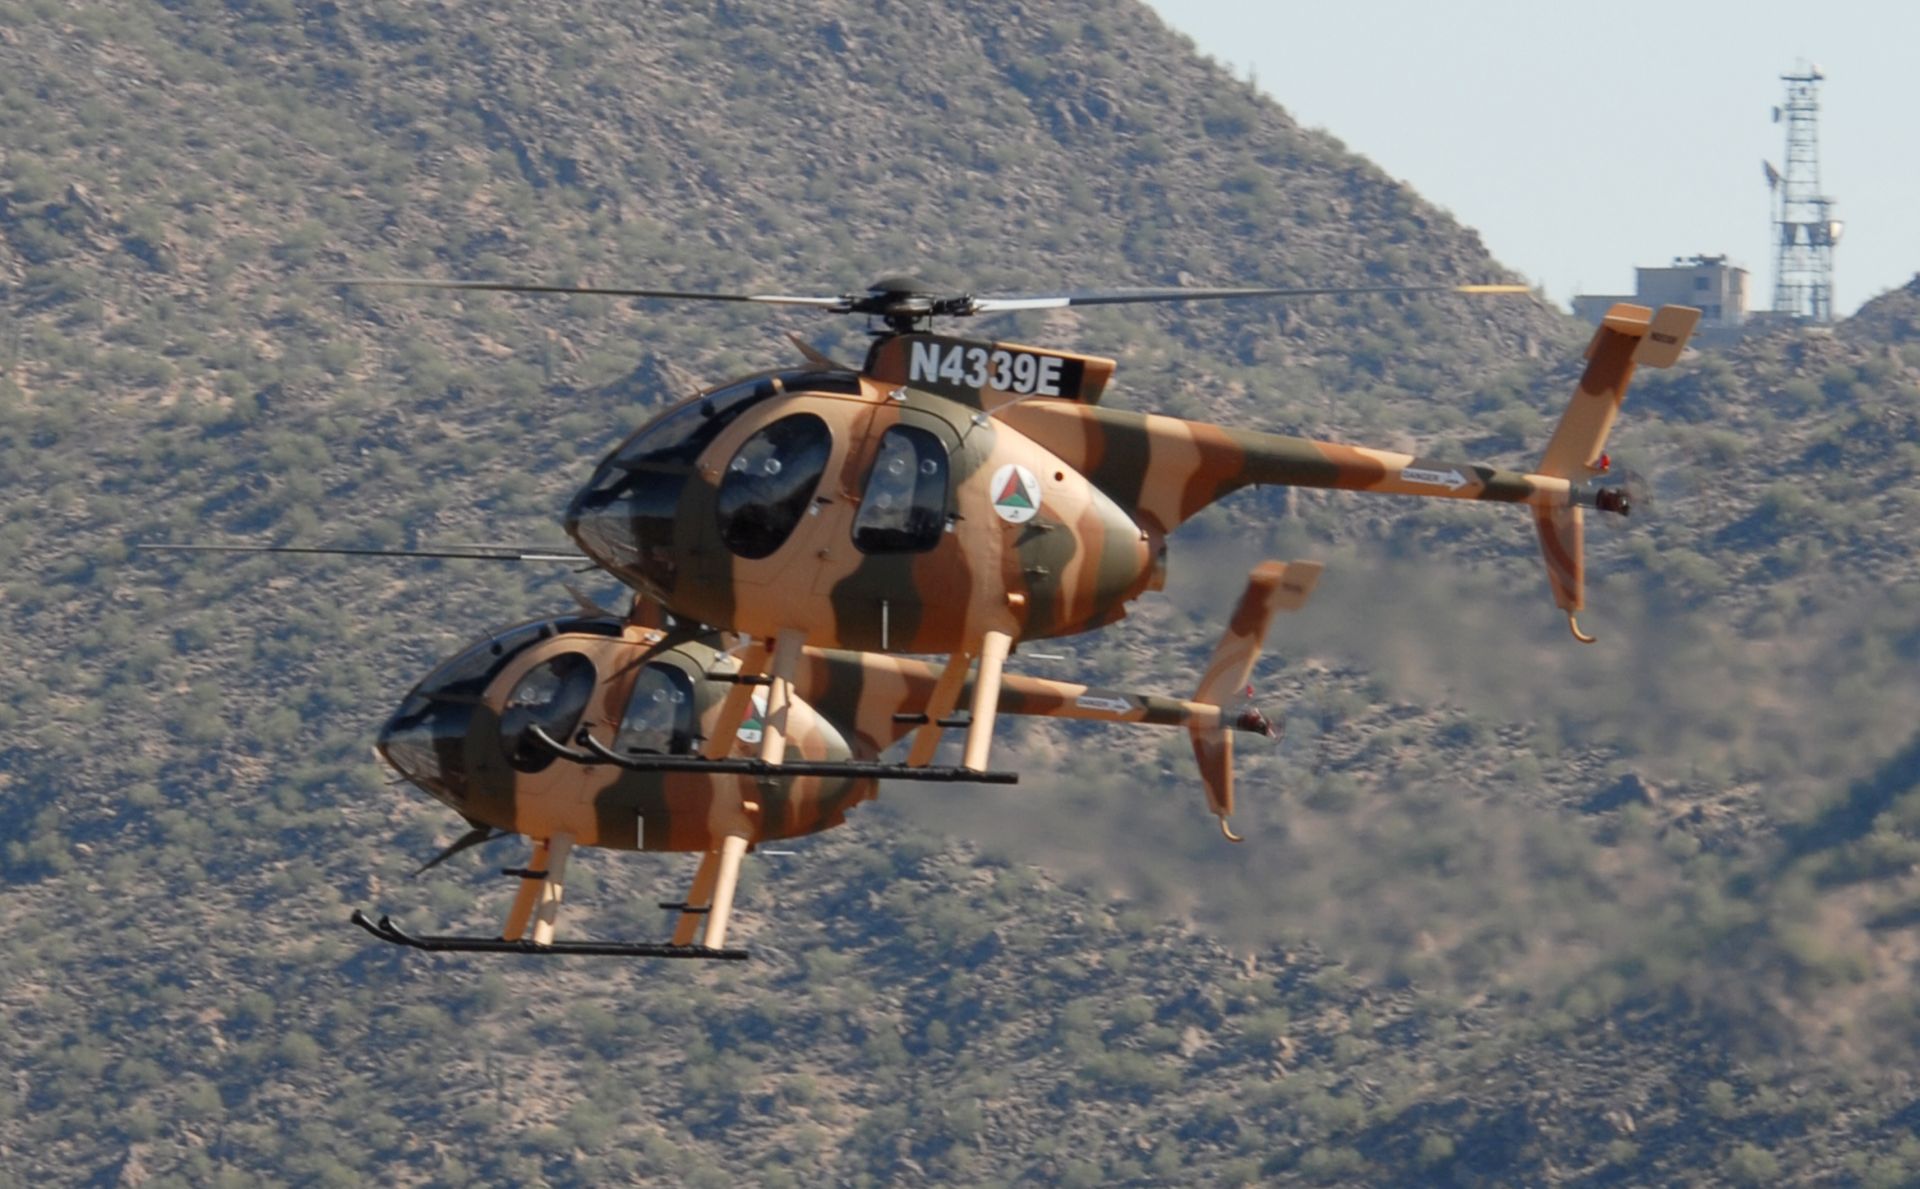 MD-530F_training_helicopters.jpg